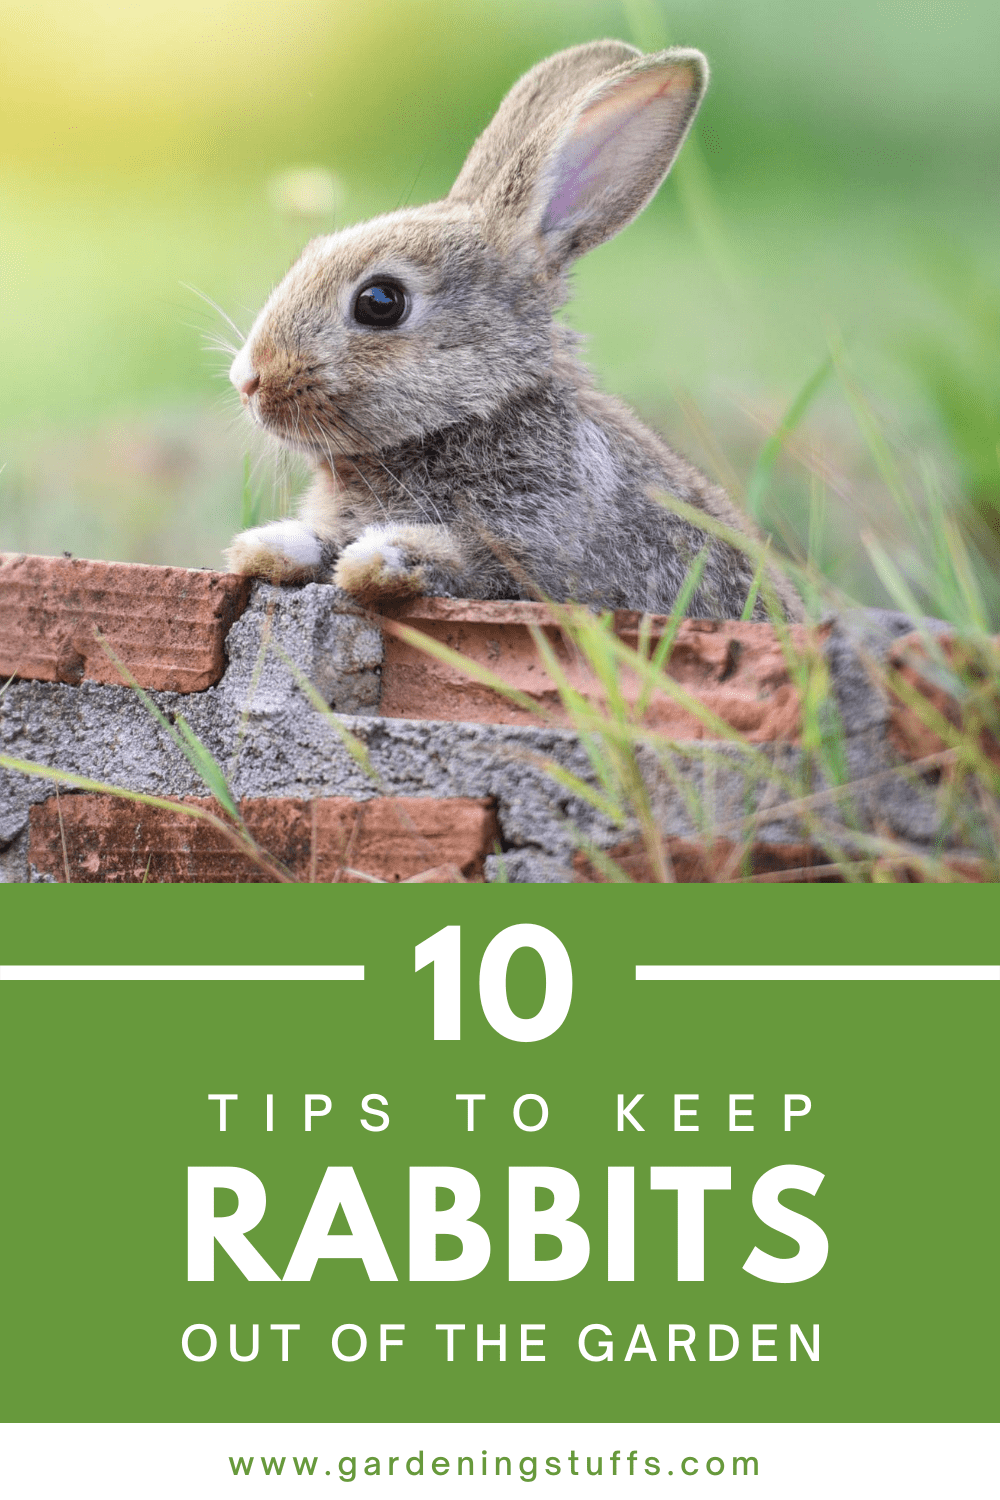 Rabbits are troublesome! The fast fluffy-tailed herbivores love munching on nearly everything on the soil. In this guide, we'll share ten easy tips to help keep rabbits out of your vegetable gardening.